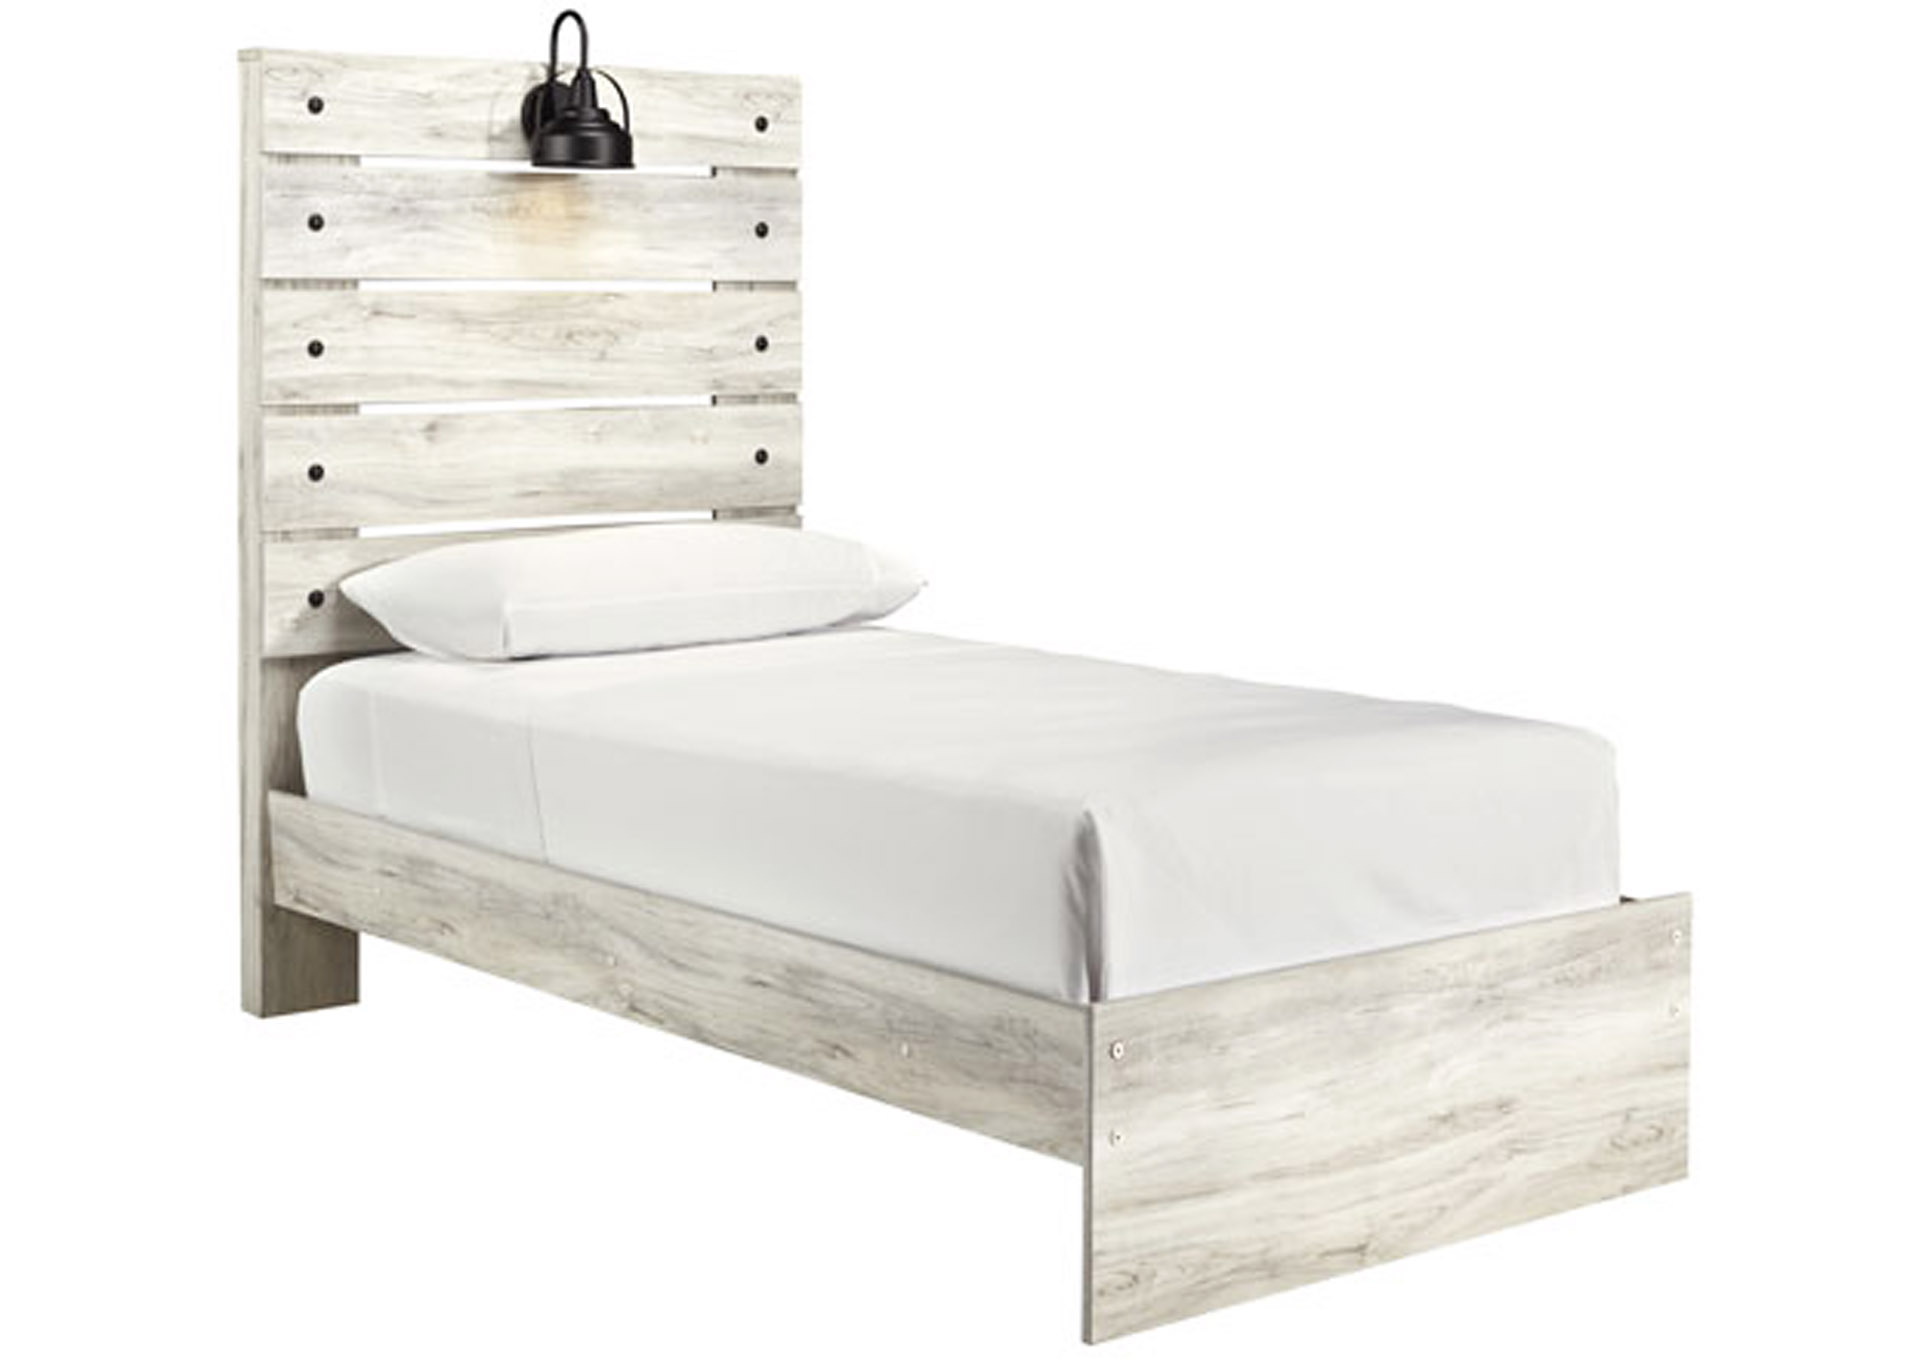 CAMBECK TWIN PANEL BED WITH LIGHT,ASHLEY FURNITURE INC.